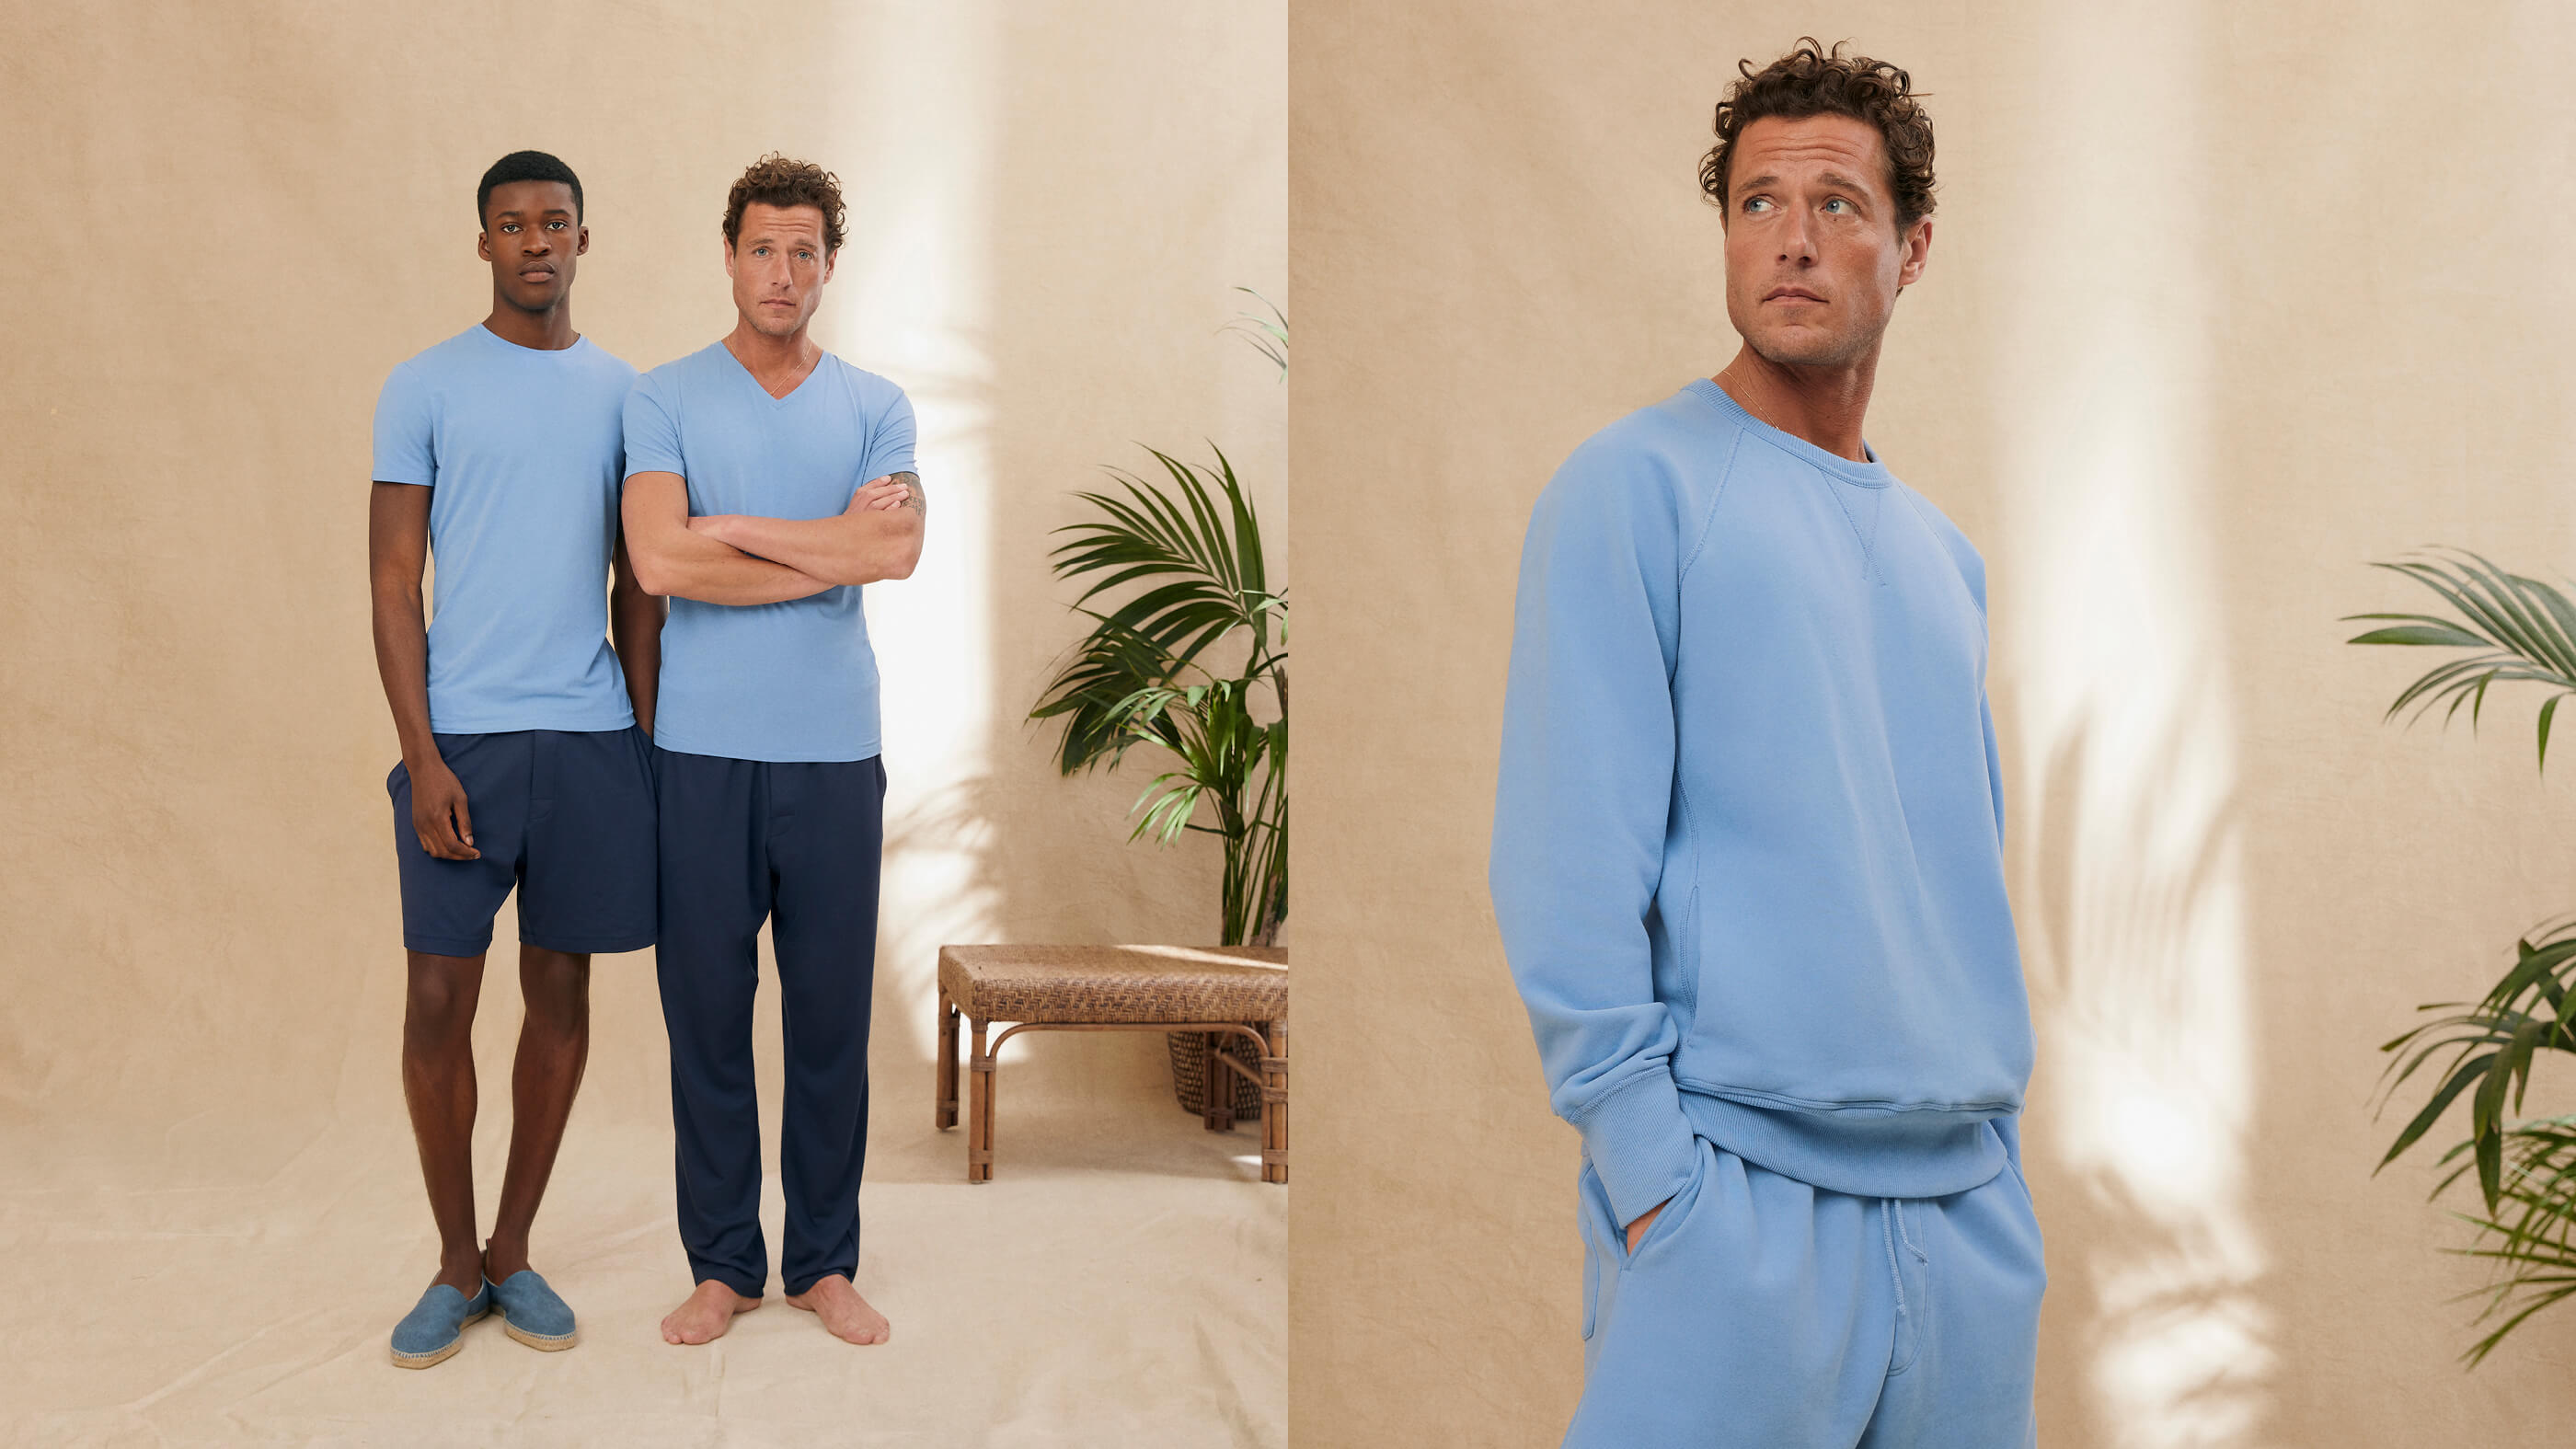 models wearing navy and light blue sweats